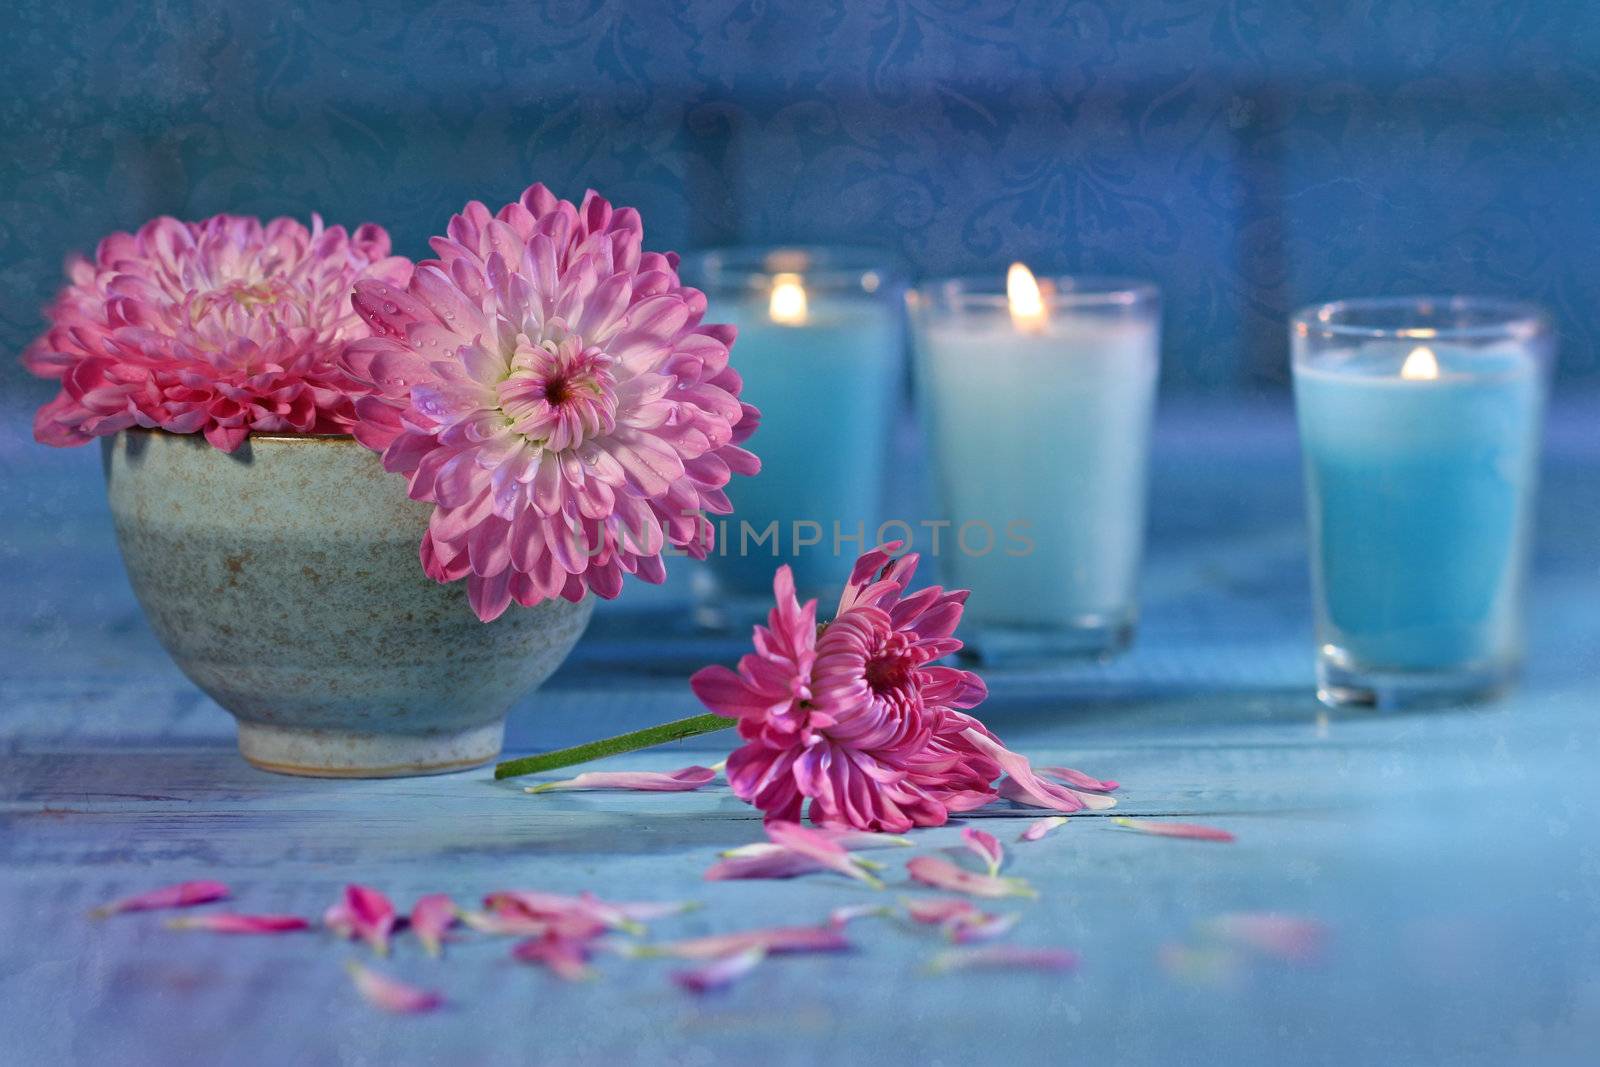 Chrysanthemum flowers with candles by Sandralise